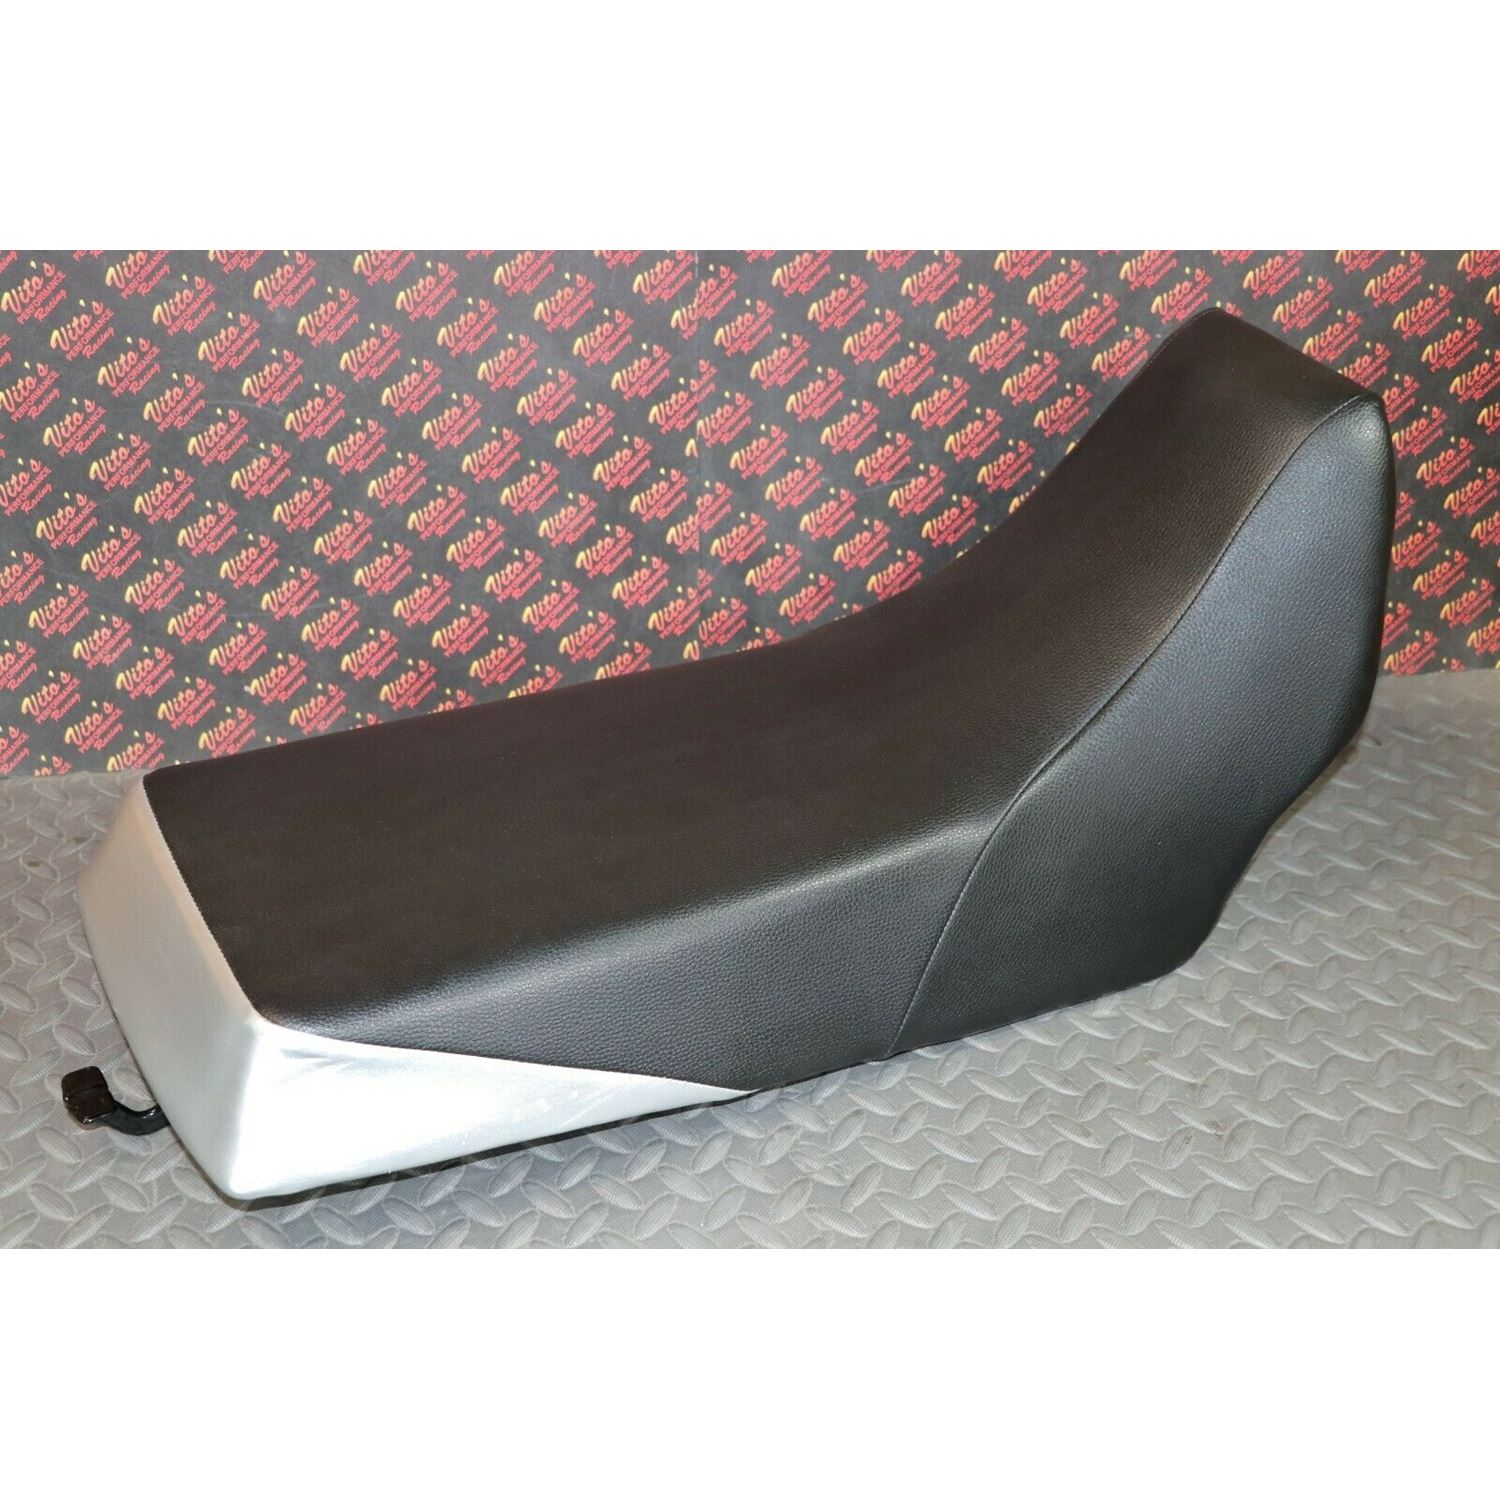 NEW Complete seat 1987-2006 Yamaha Banshee cover l